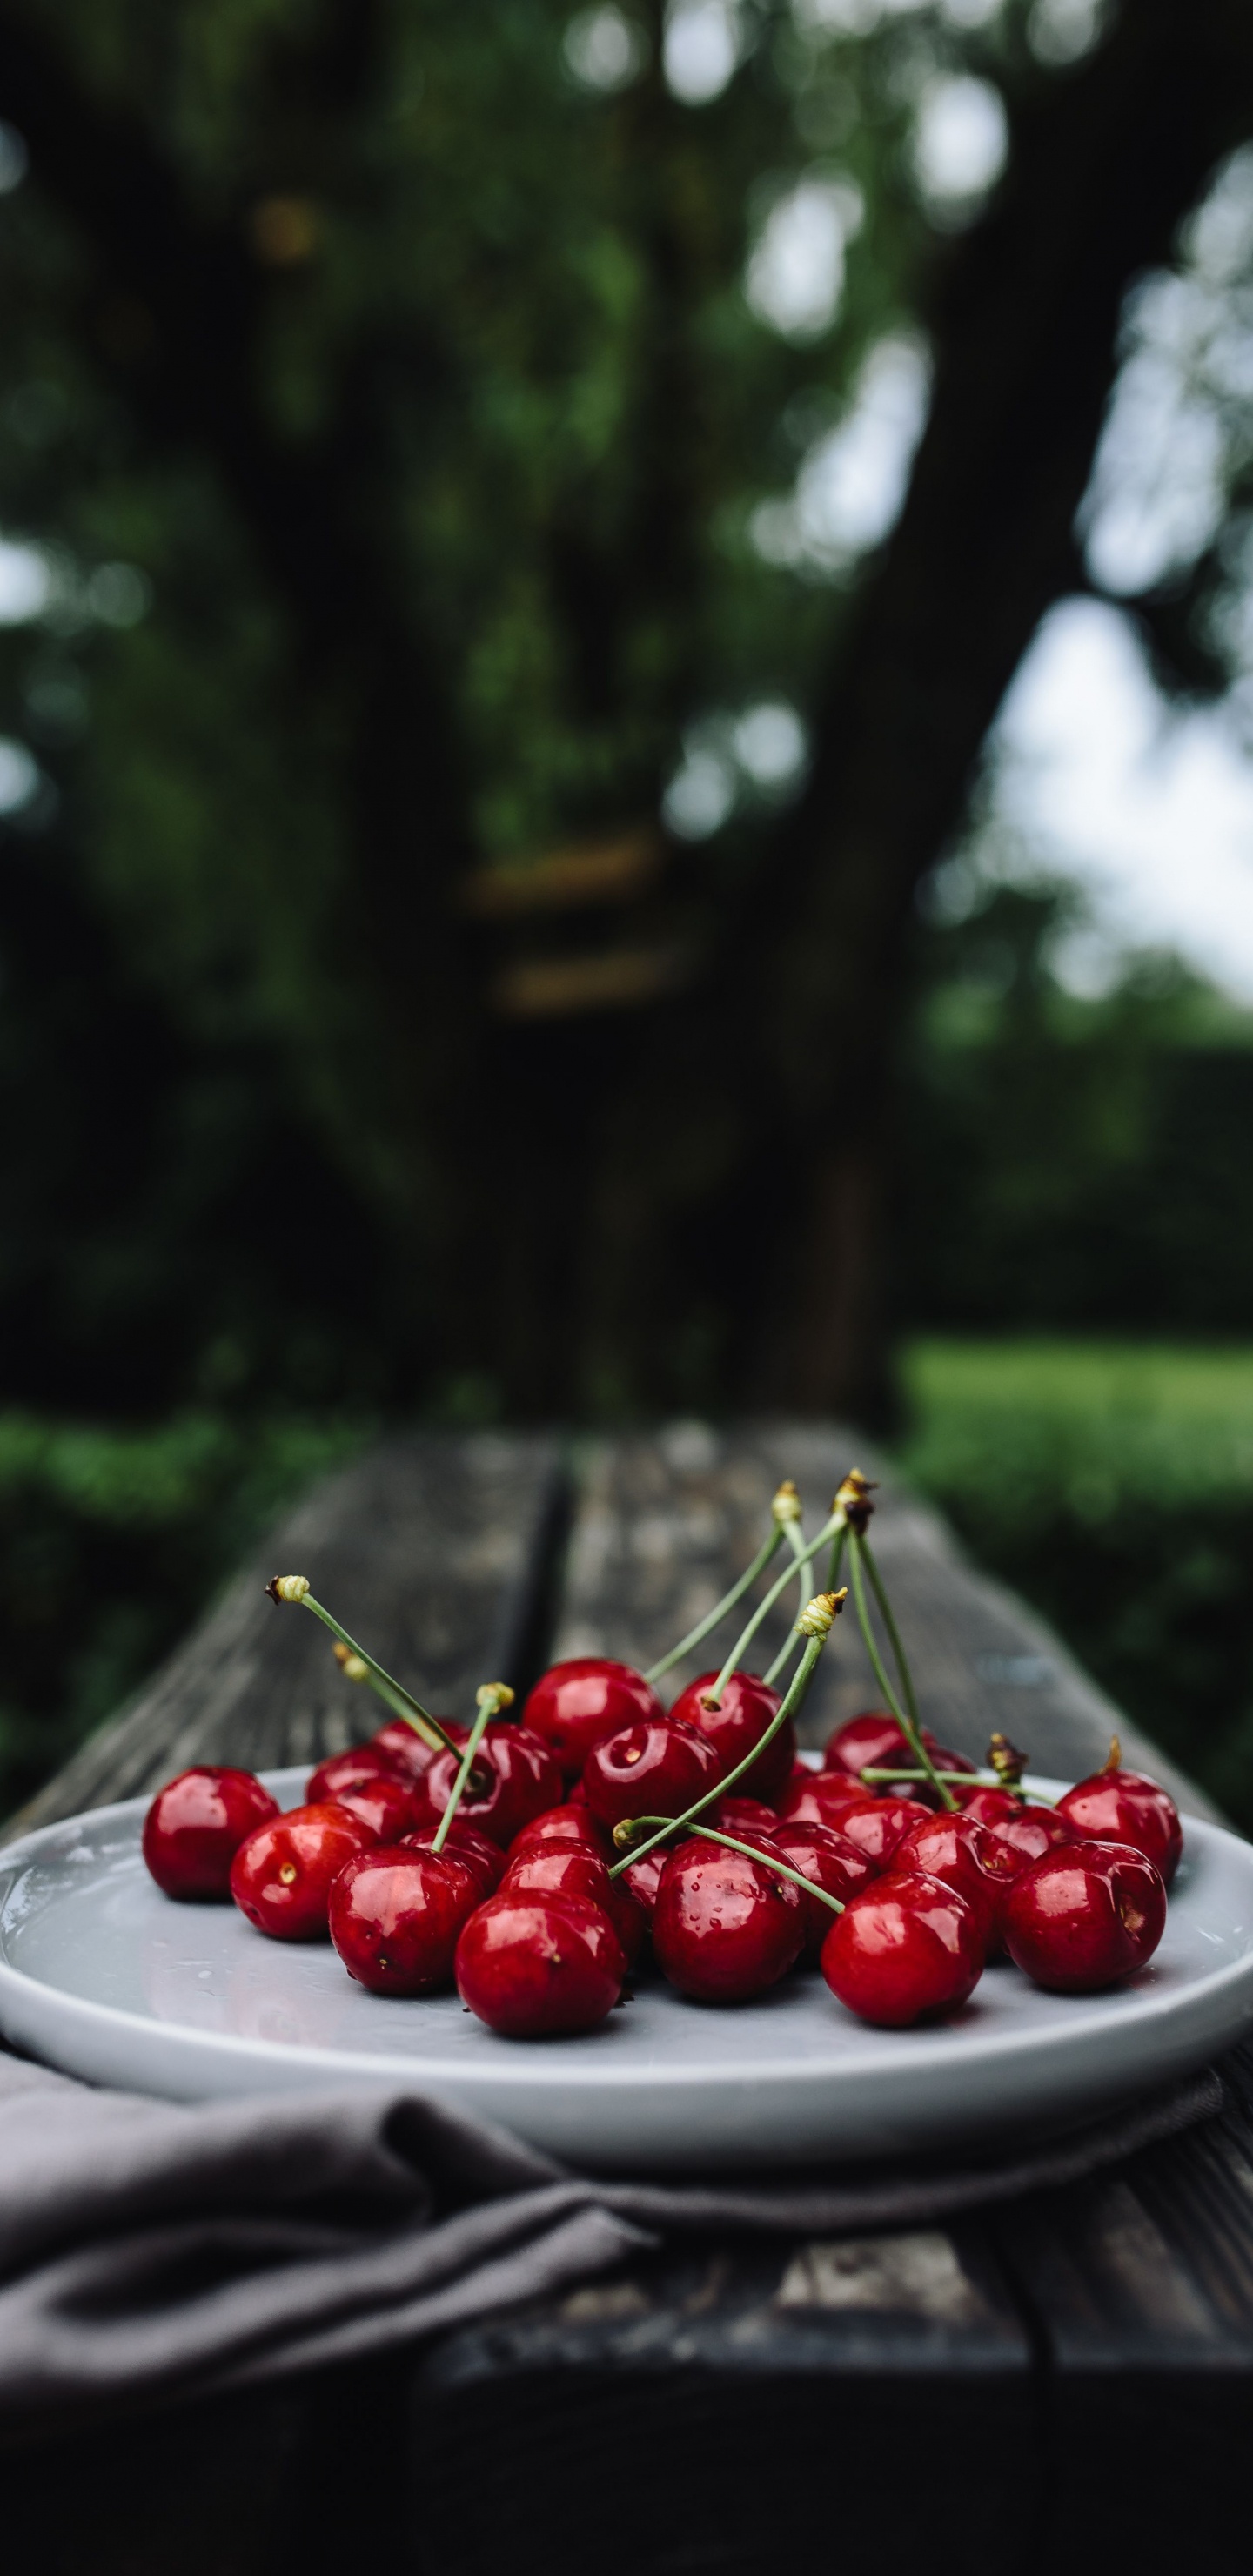 Red Cherries on White Ceramic Plate. Wallpaper in 1440x2960 Resolution